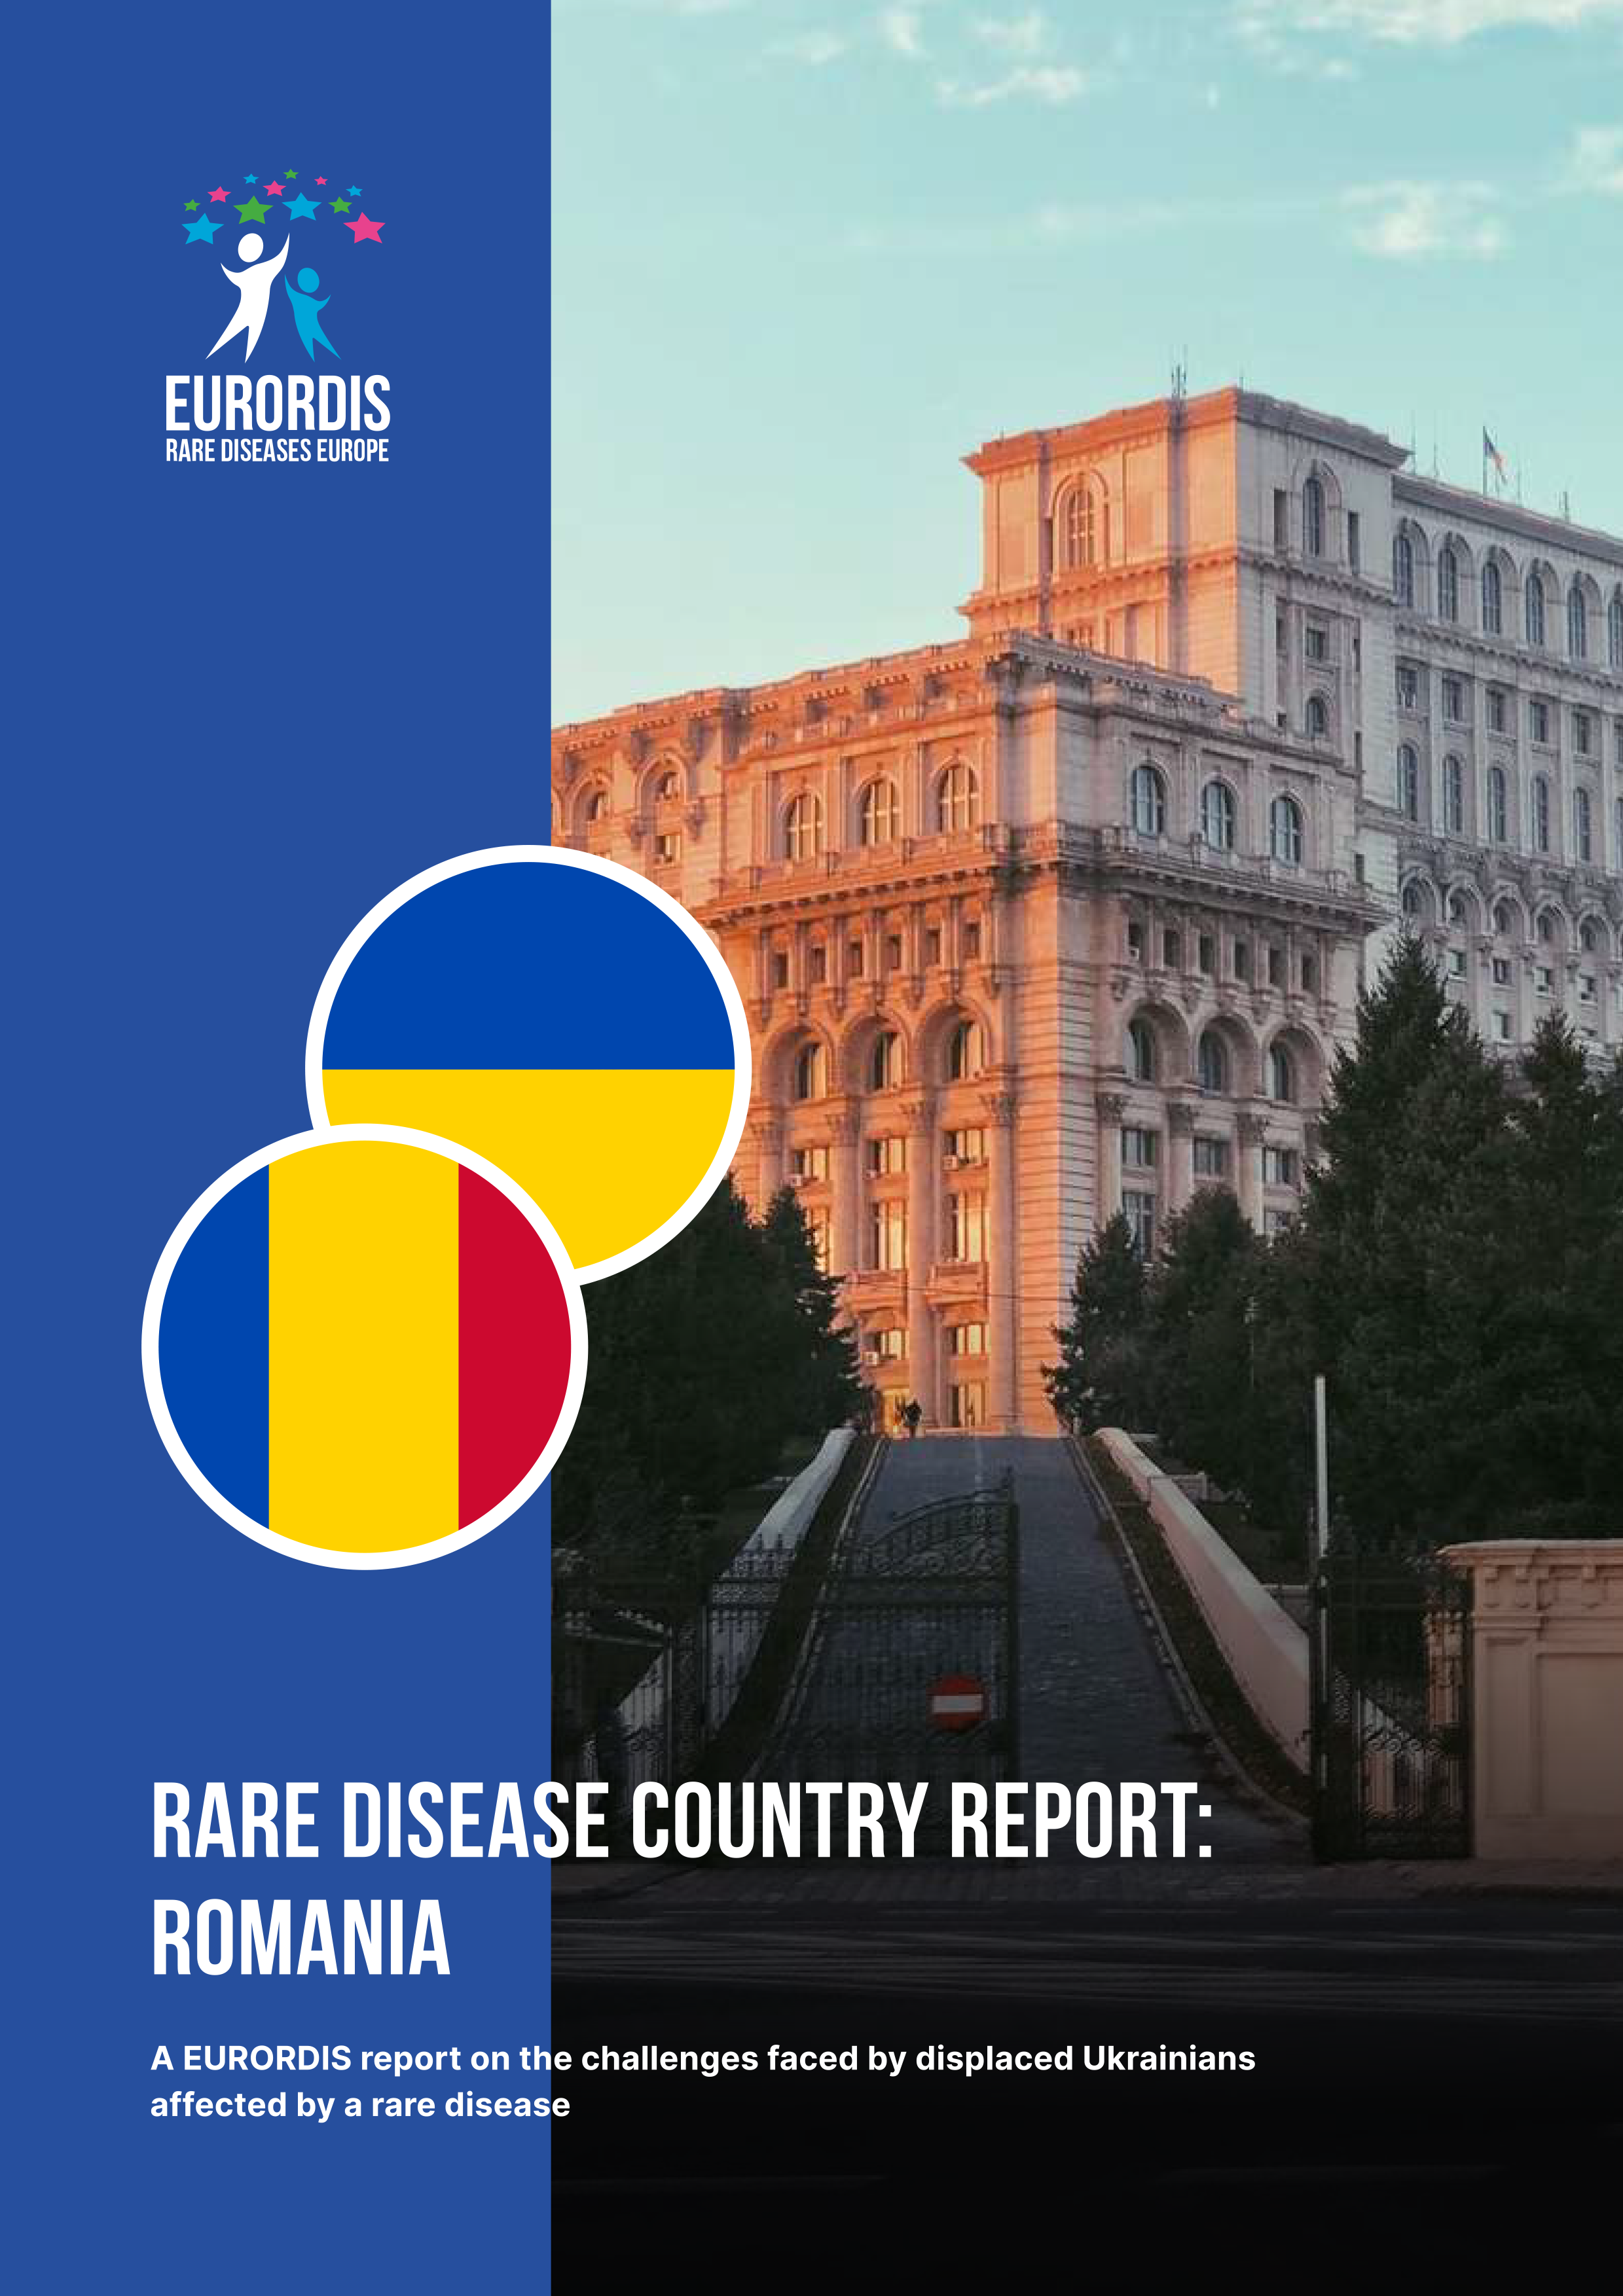 A EURORDIS report on the challenges faced by displaced Ukrainians affected by a rare disease — Romania